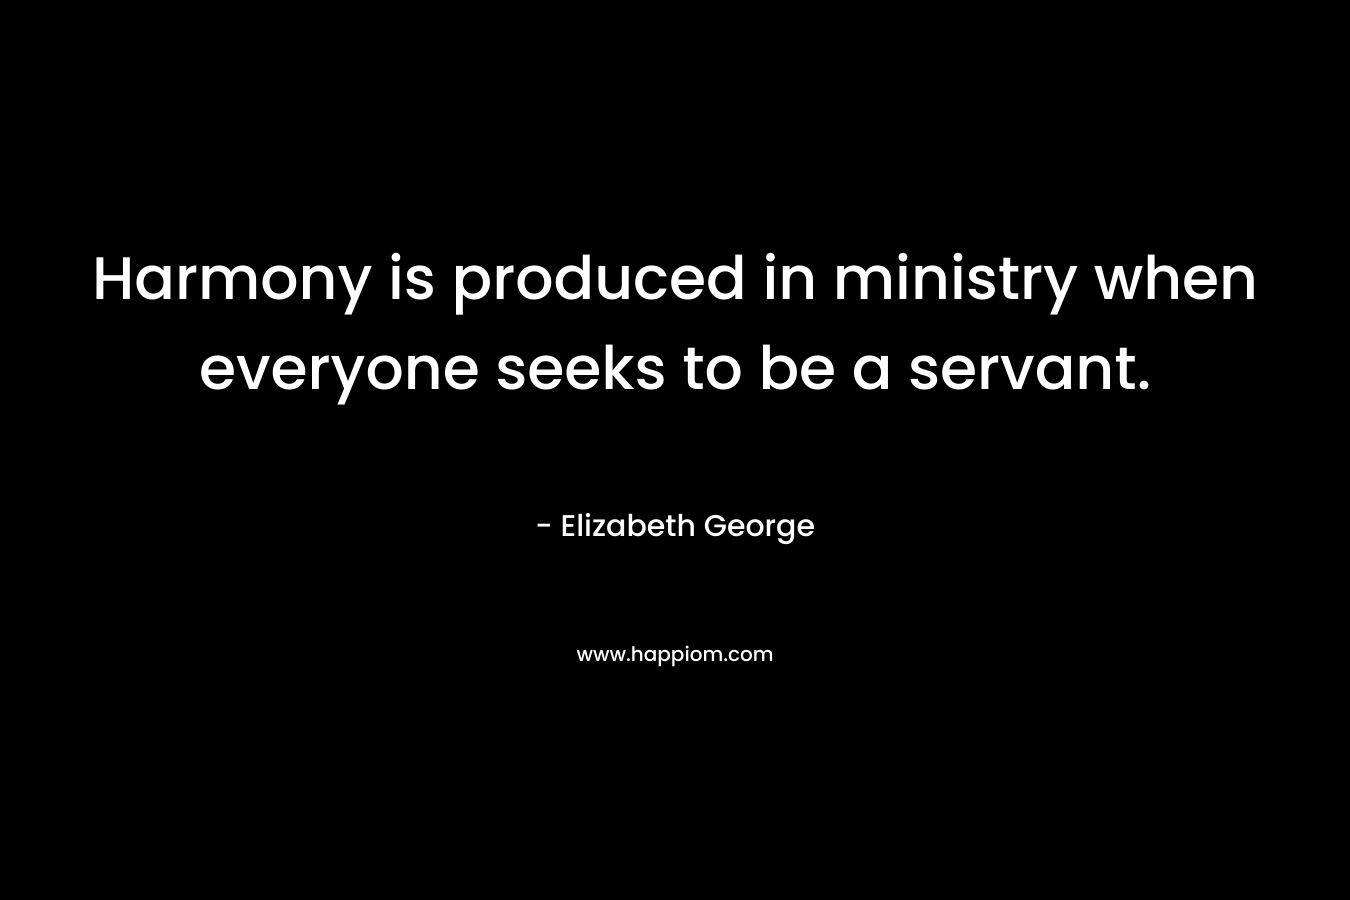 Harmony is produced in ministry when everyone seeks to be a servant. – Elizabeth George